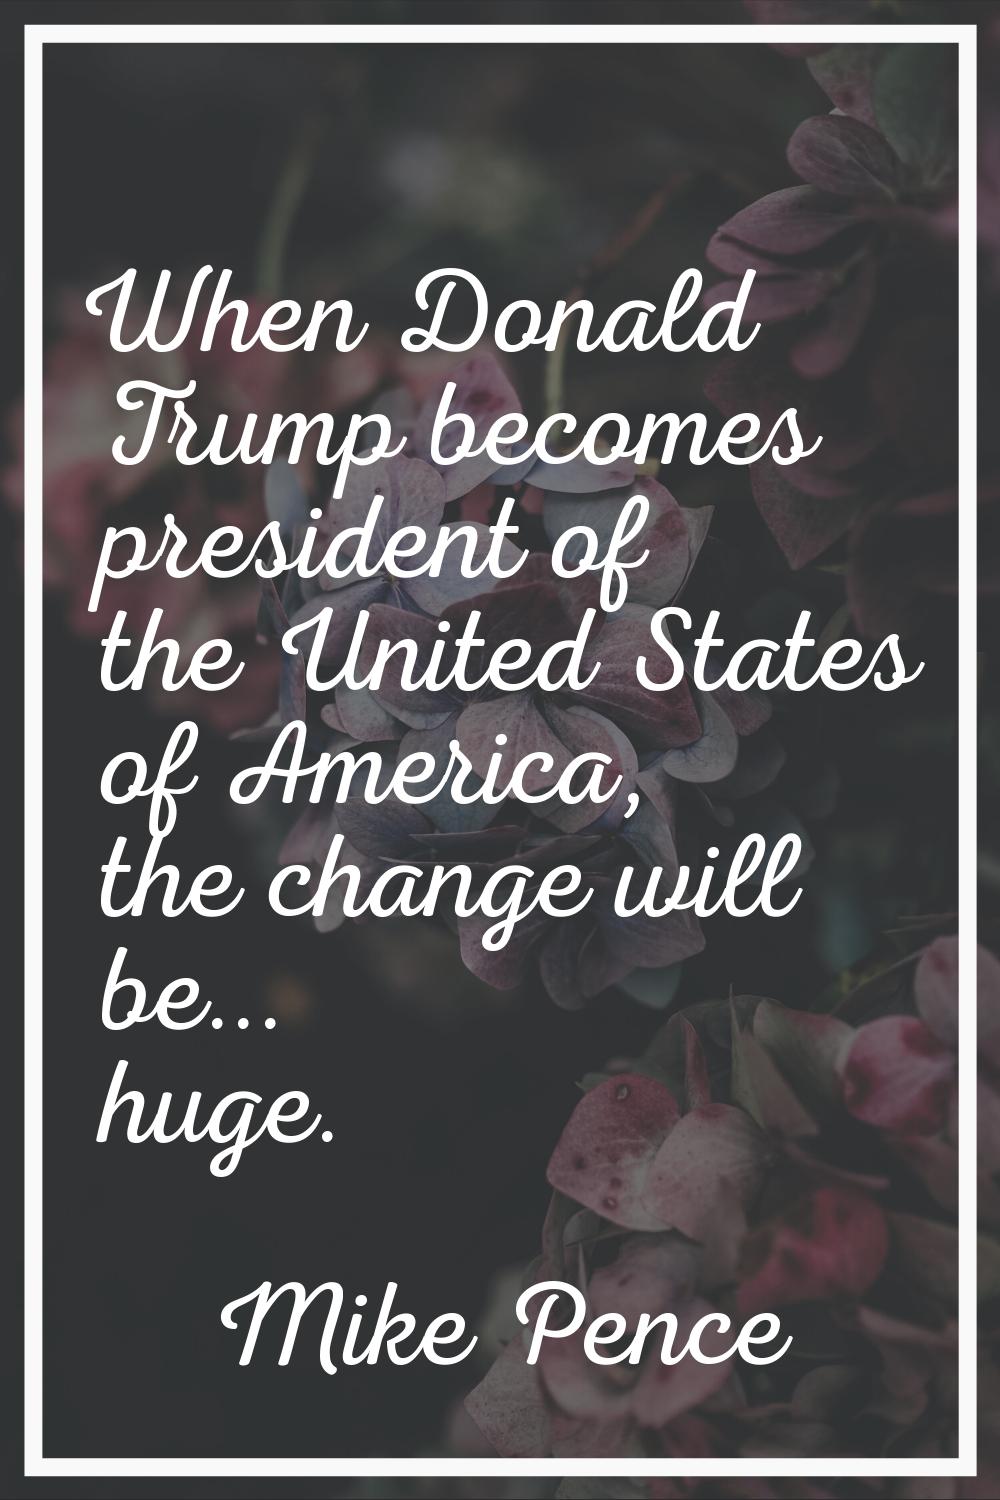 When Donald Trump becomes president of the United States of America, the change will be... huge.